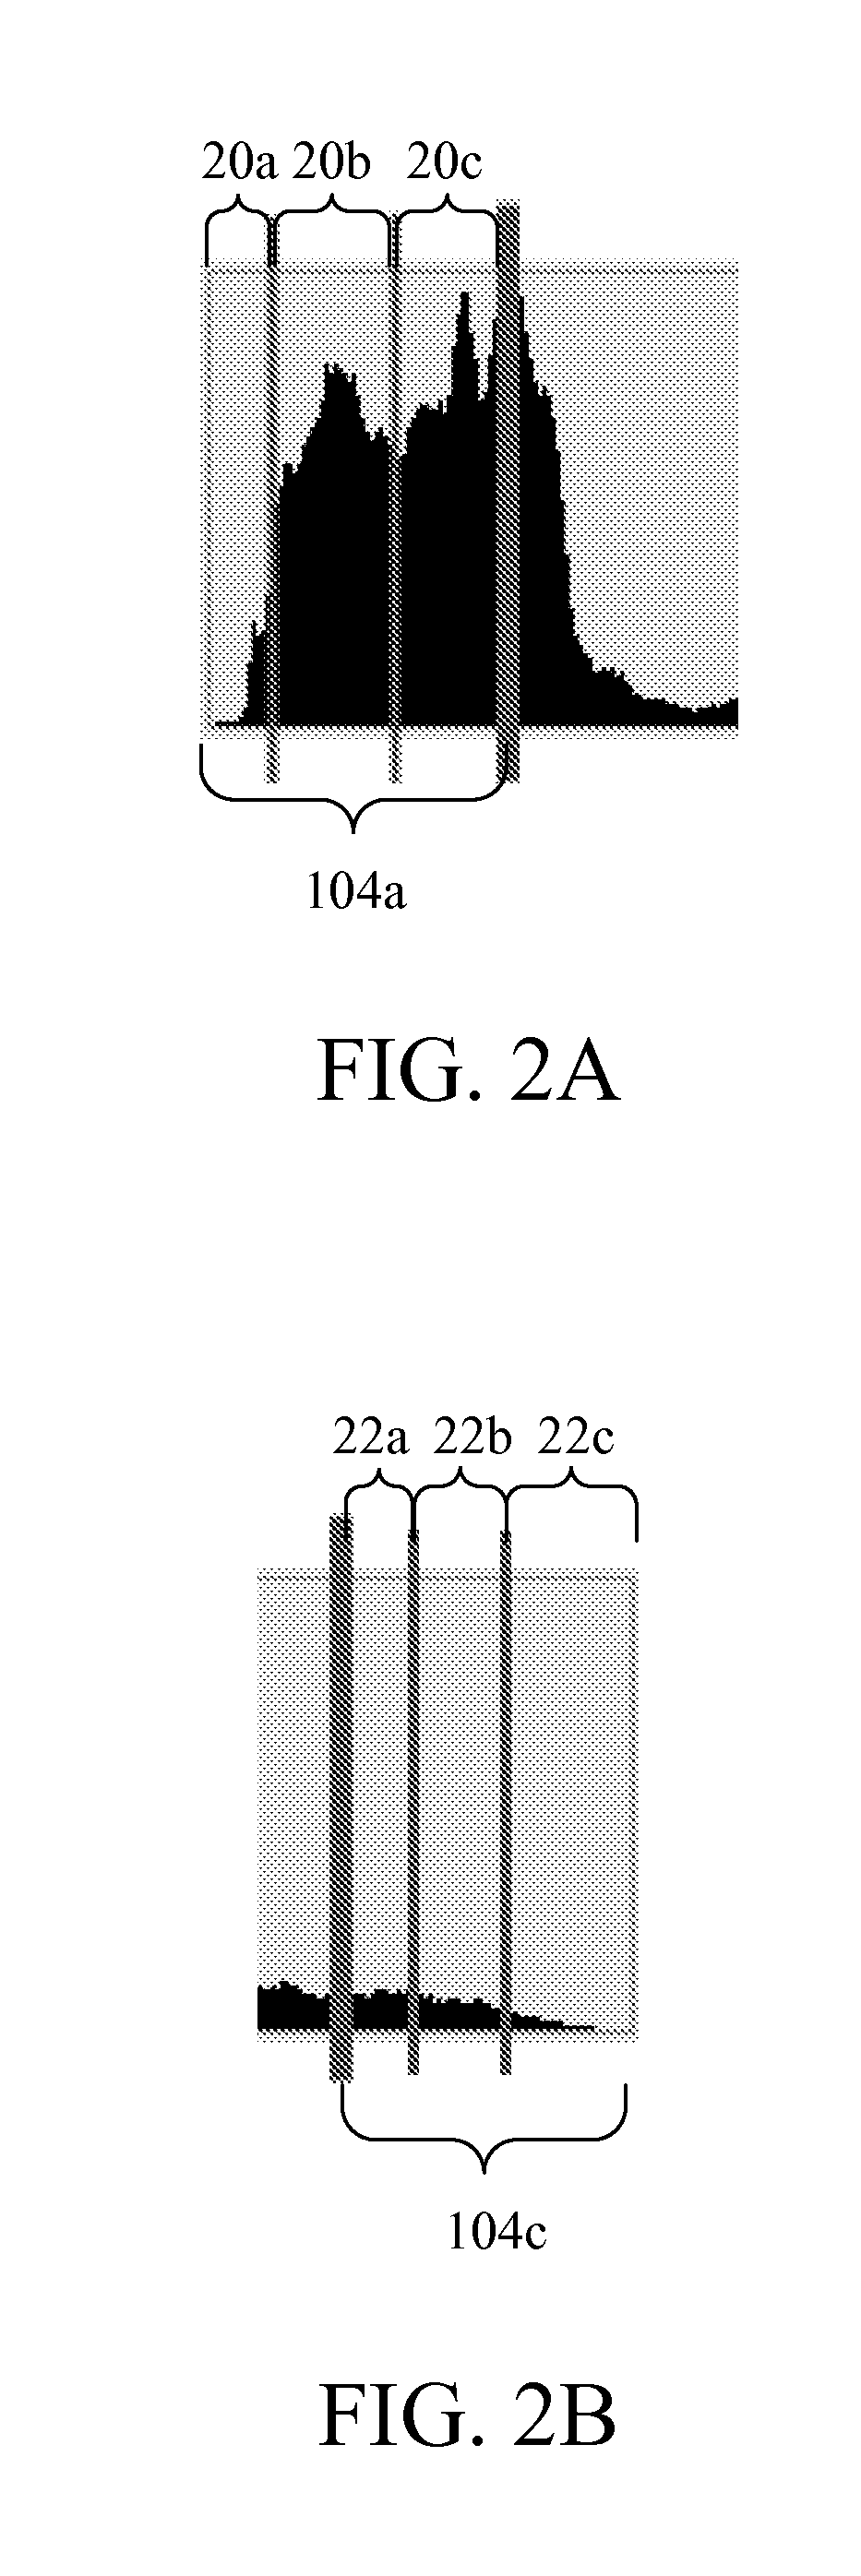 Exposure Value Adjustment Apparatus, Method, and Non-Transitory Tangible Machine-Readable Medium Thereof